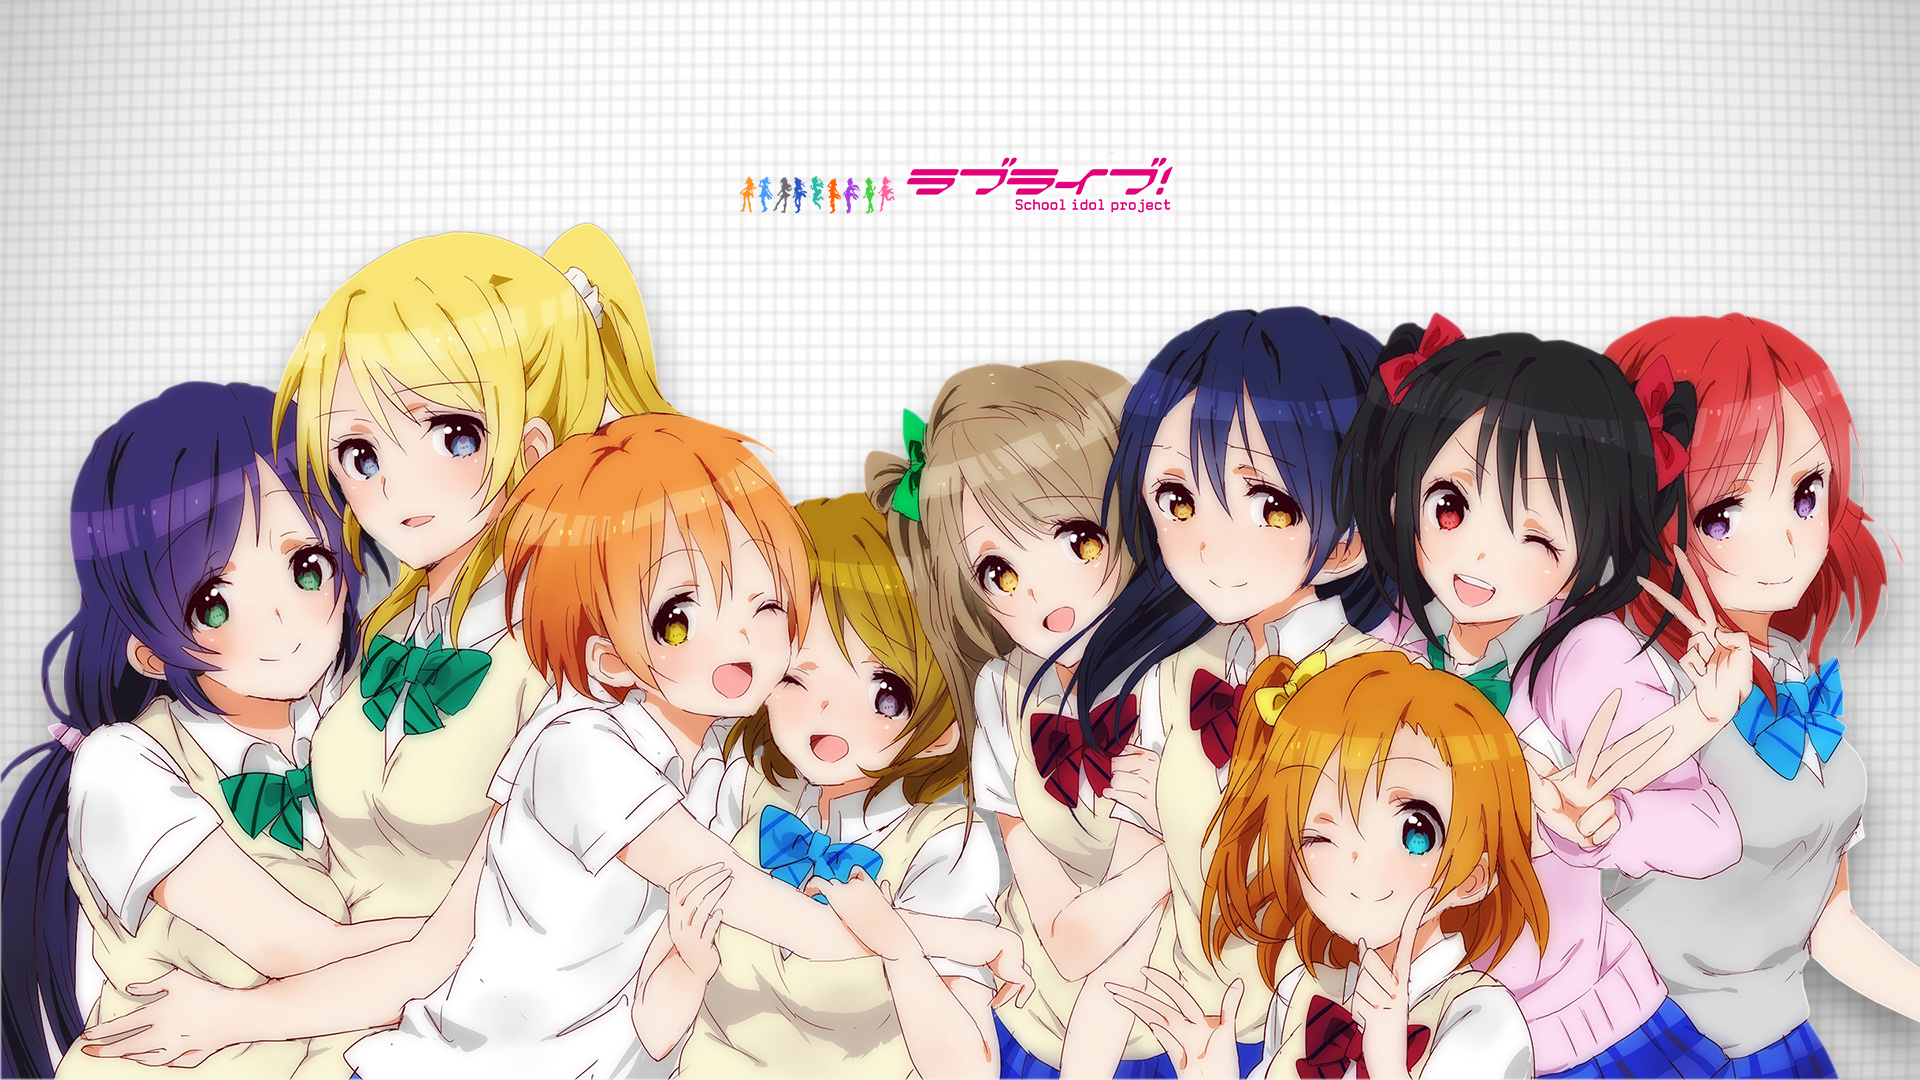 Free Download Pc Pc Naver 19x1080 For Your Desktop Mobile Tablet Explore 96 Love Live Wallpapers Live Love Wallpaper Love Live Wallpaper Love Live Wallpapers